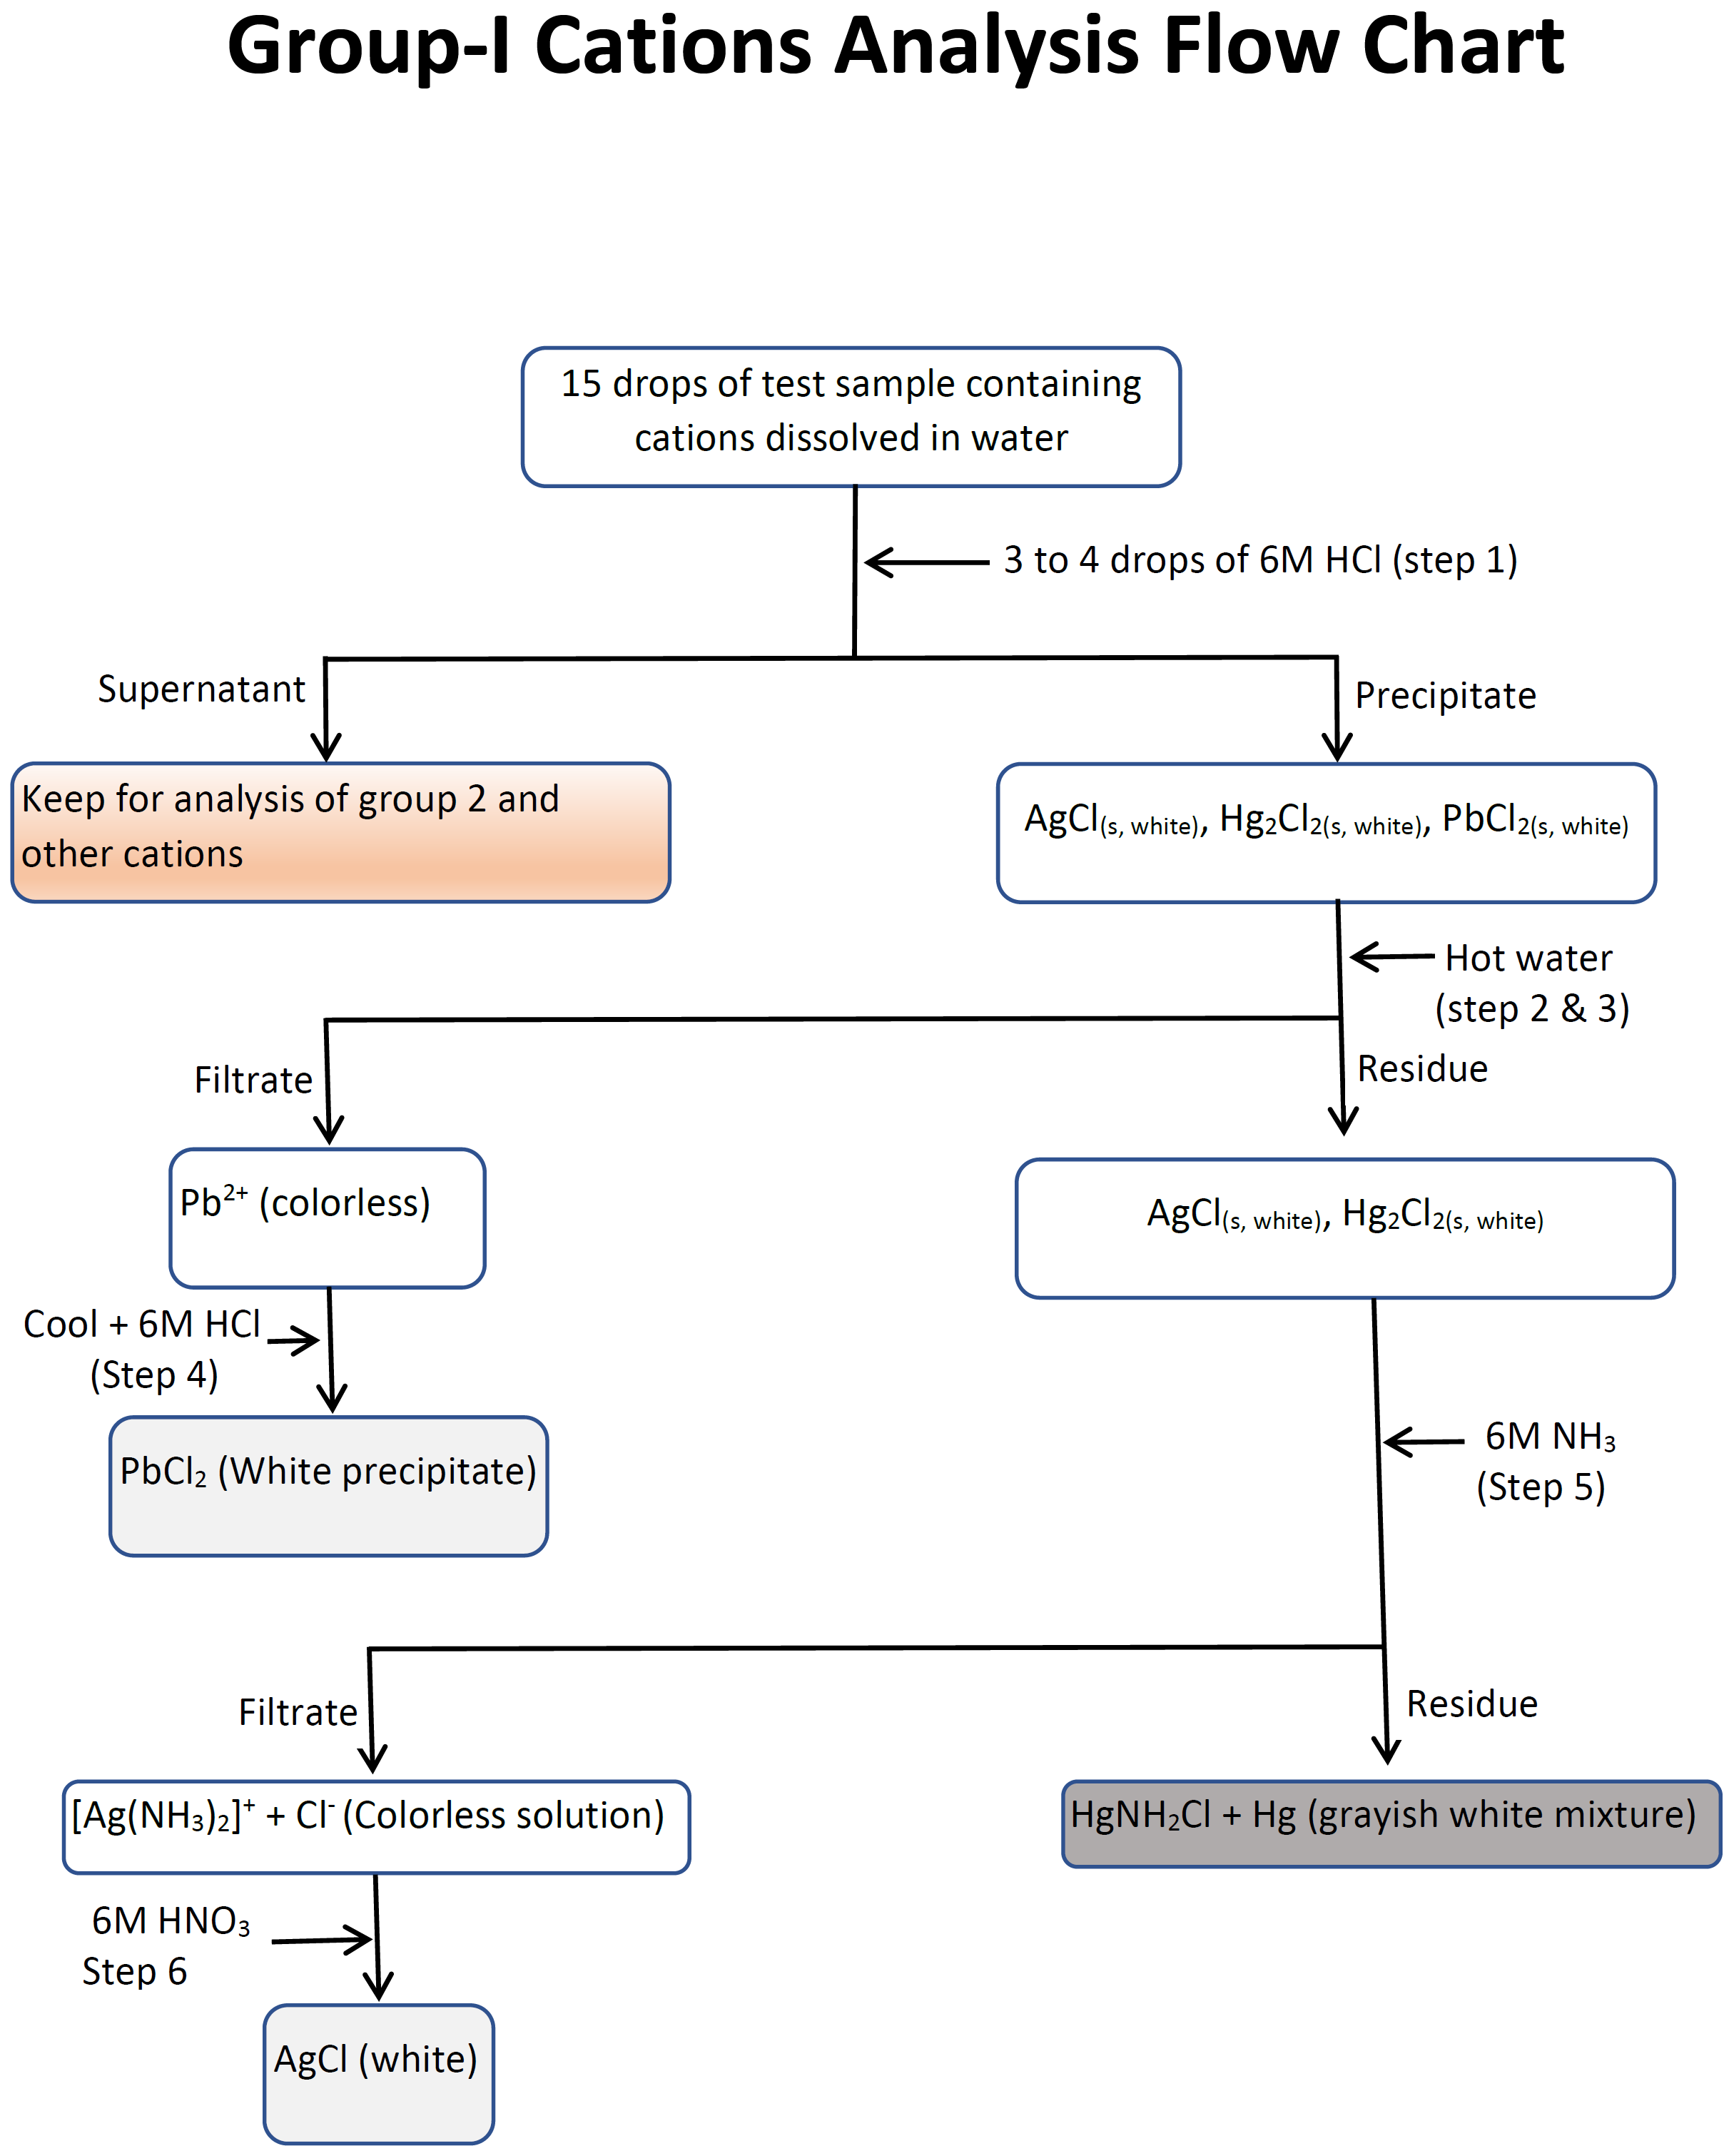 Flowchart for the separation and analyses of group I cations